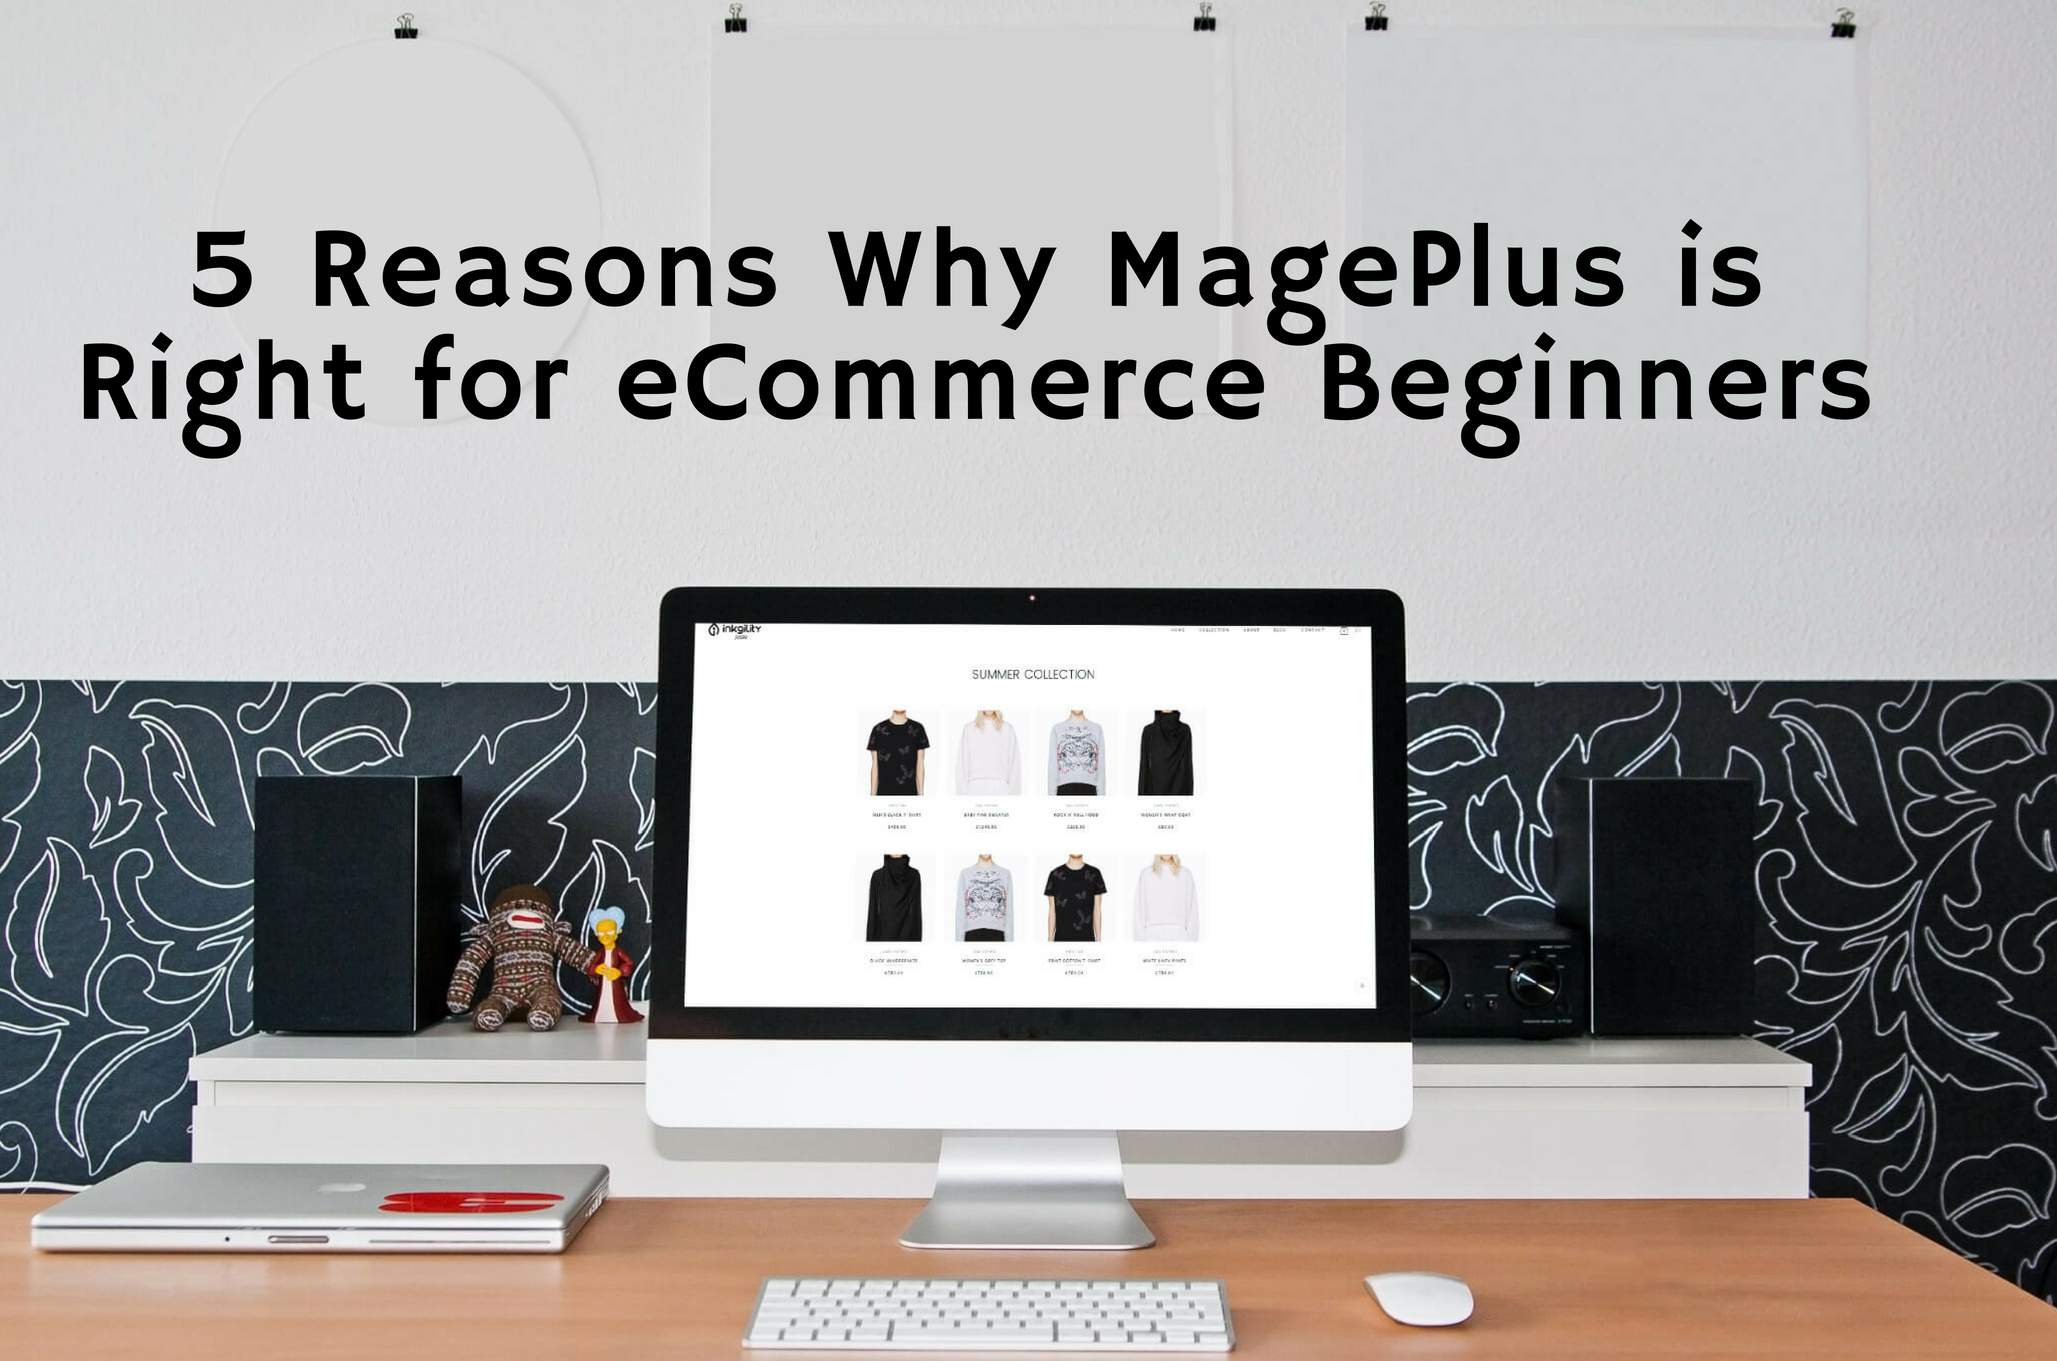 5 Reasons Why MagePlus is Right for eCommerce Beginners